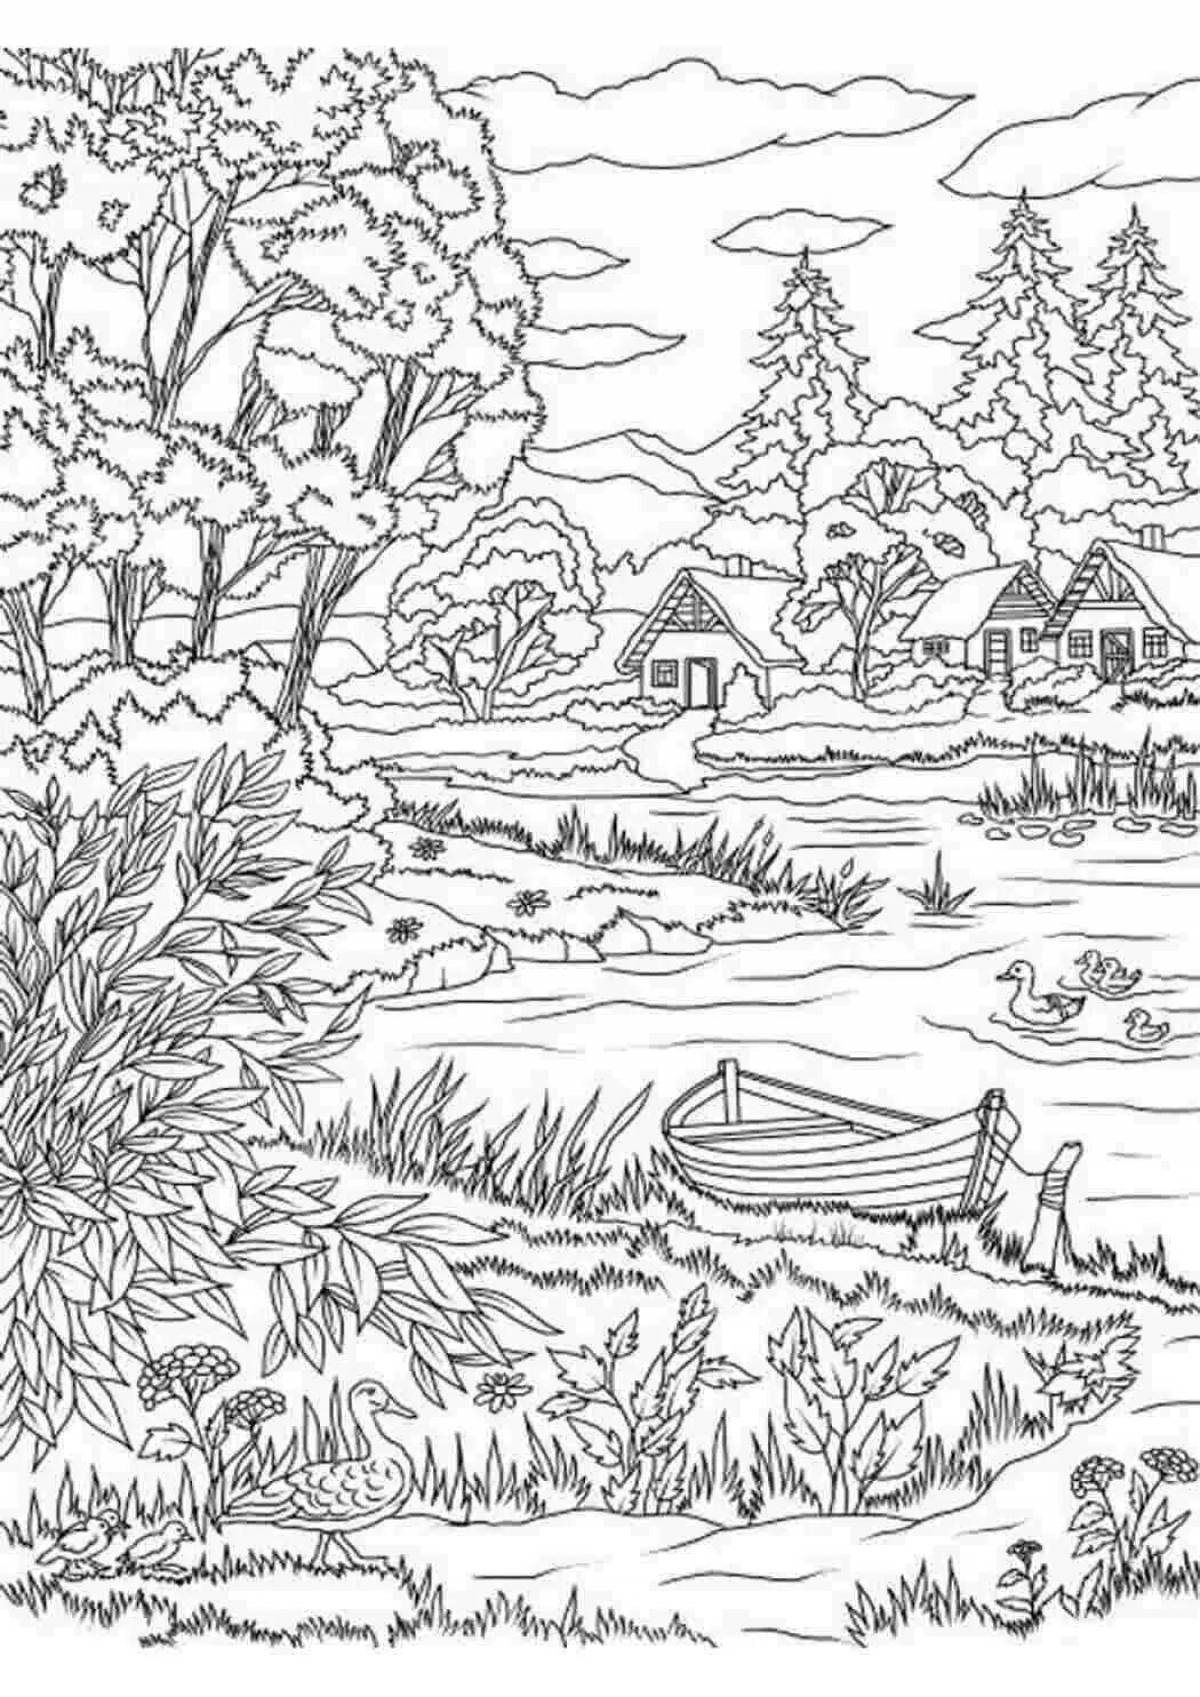 Exalted coloring page beautiful for all adults nature